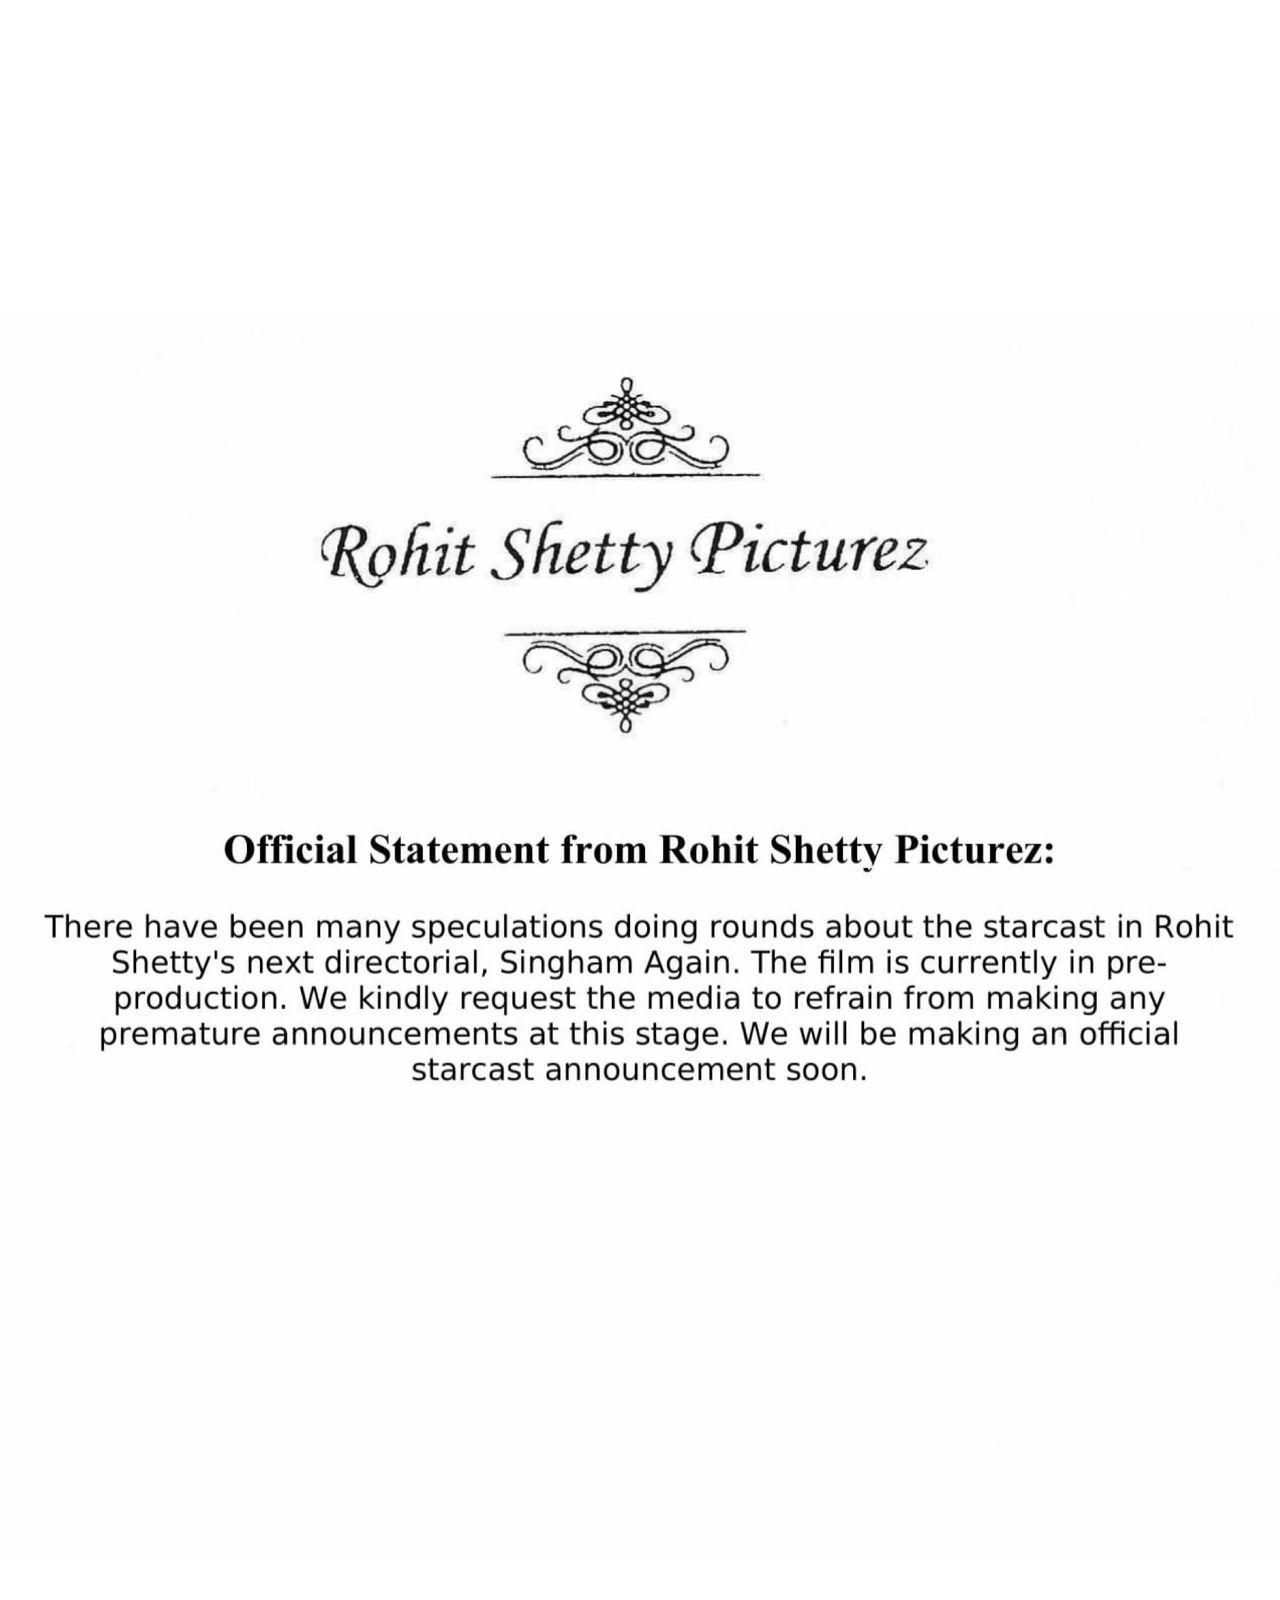 Rohit Shetty Pictures shares a disclaimer about Singham Again.